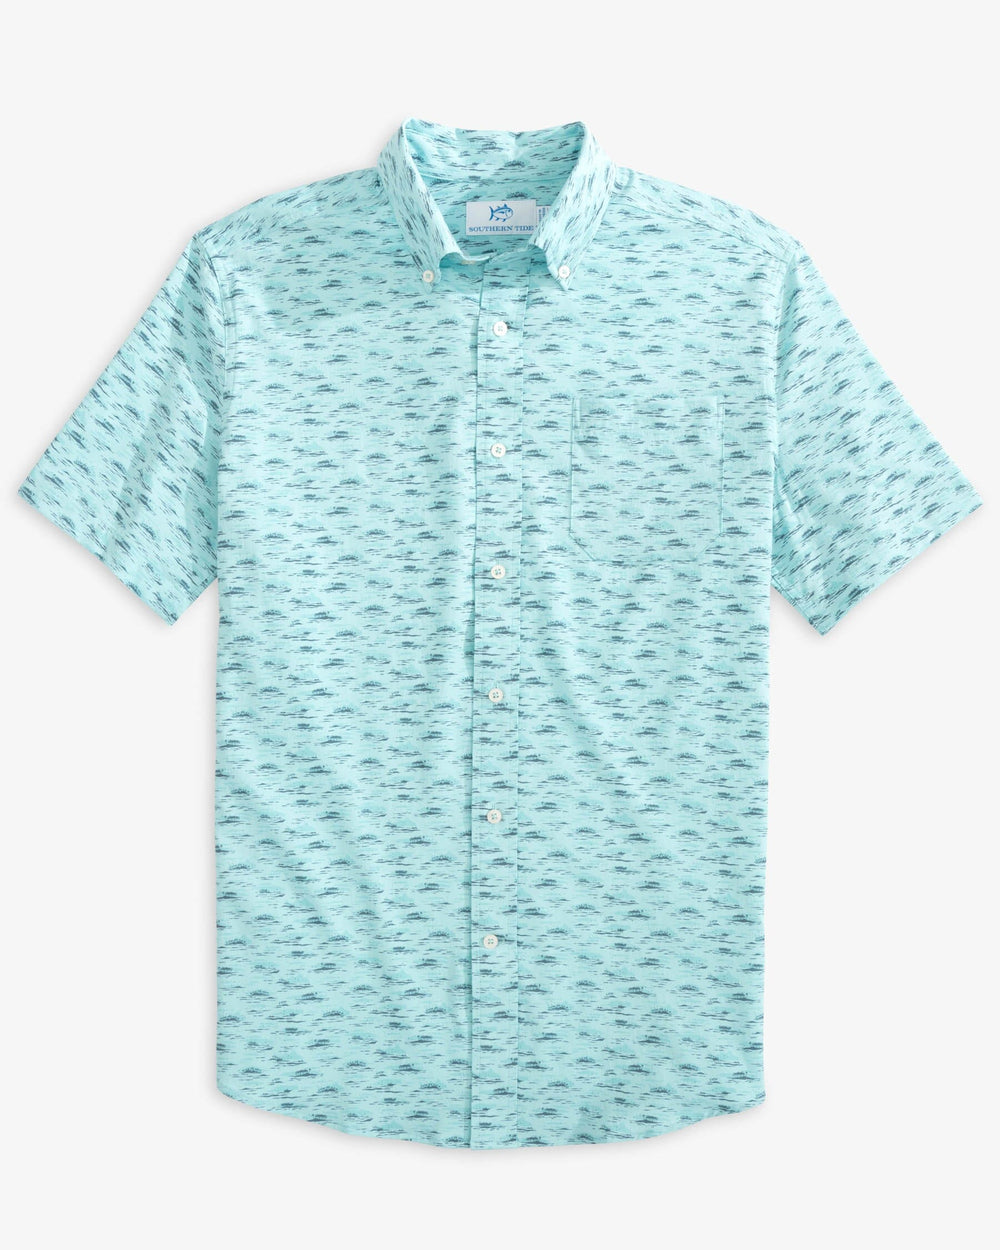 The front view of the Southern Tide Sea Forest Intercoastal Short Sleeve Button Down Sport Shirt by Southern Tide - Turquoise Sea